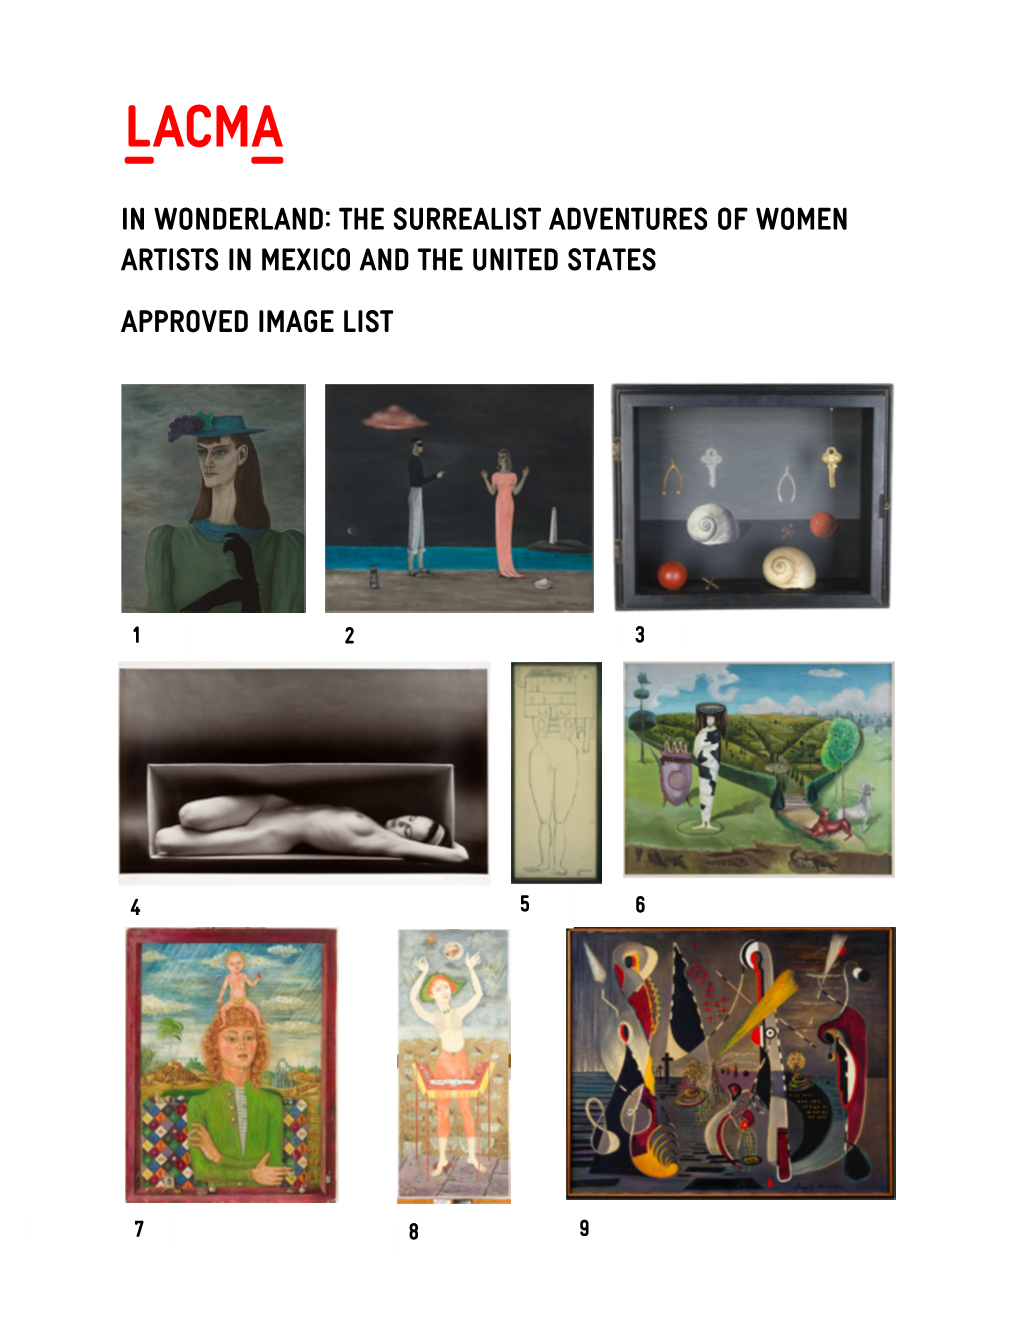 The Surrealist Adventures of Women Artists in Mexico and the United States